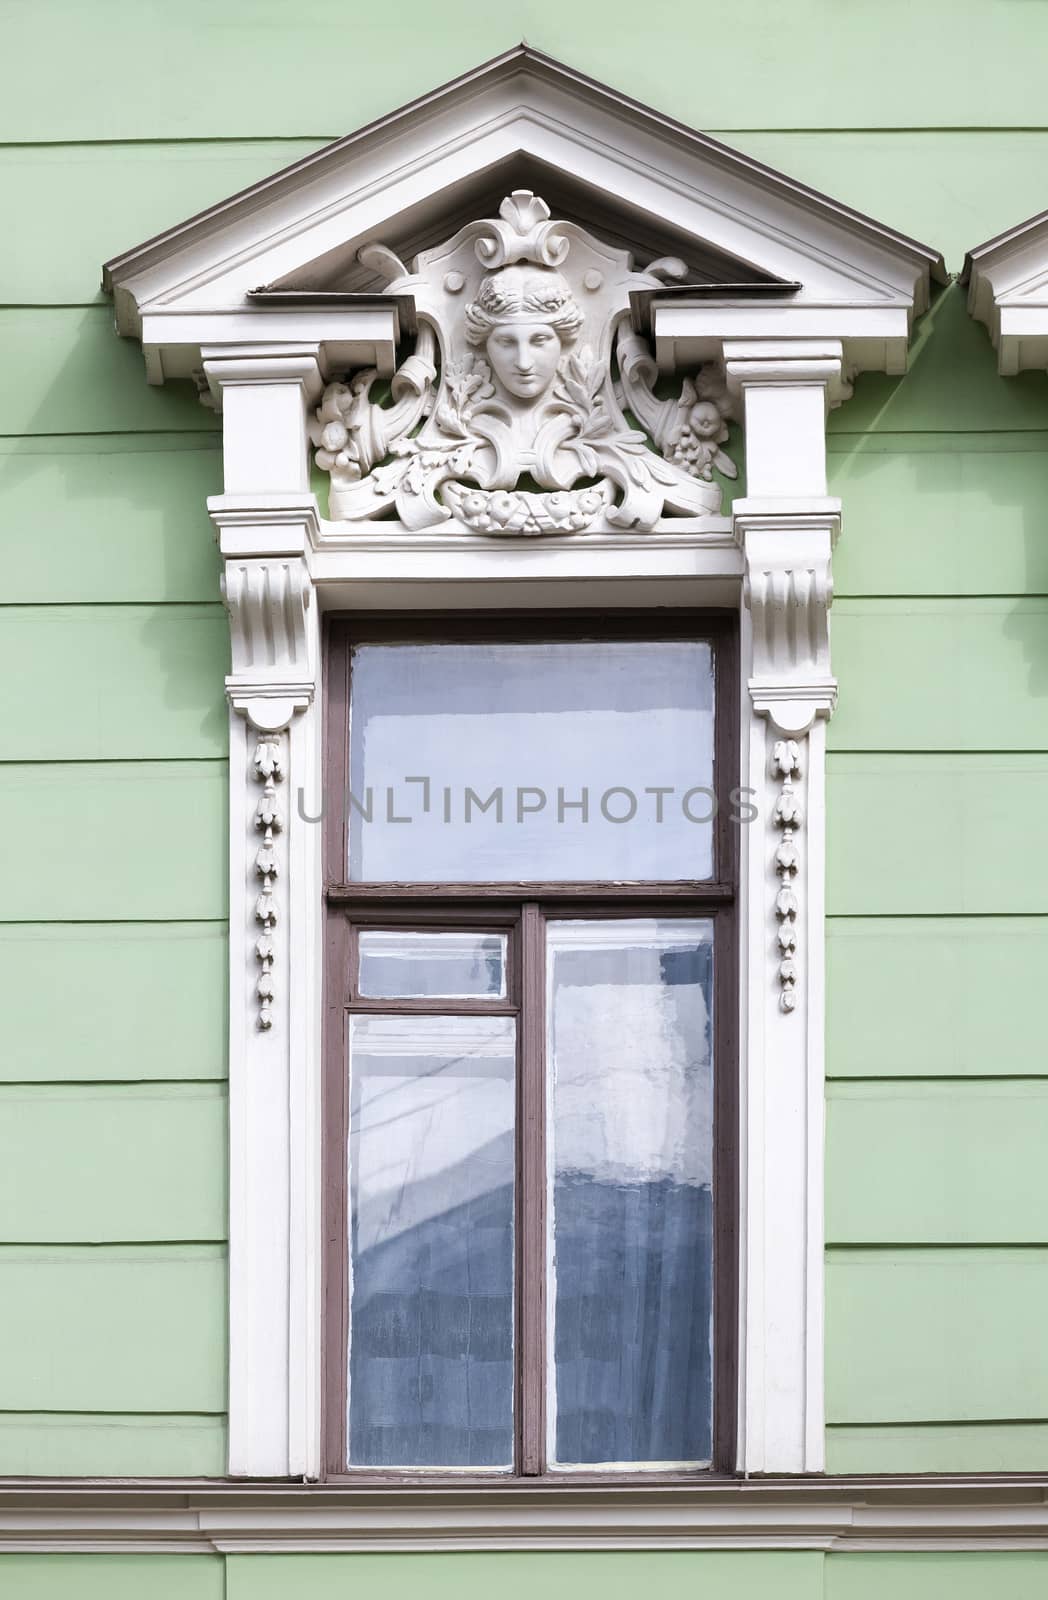 Architecture detail, window of an old building, Saint-Petersburg, Russia